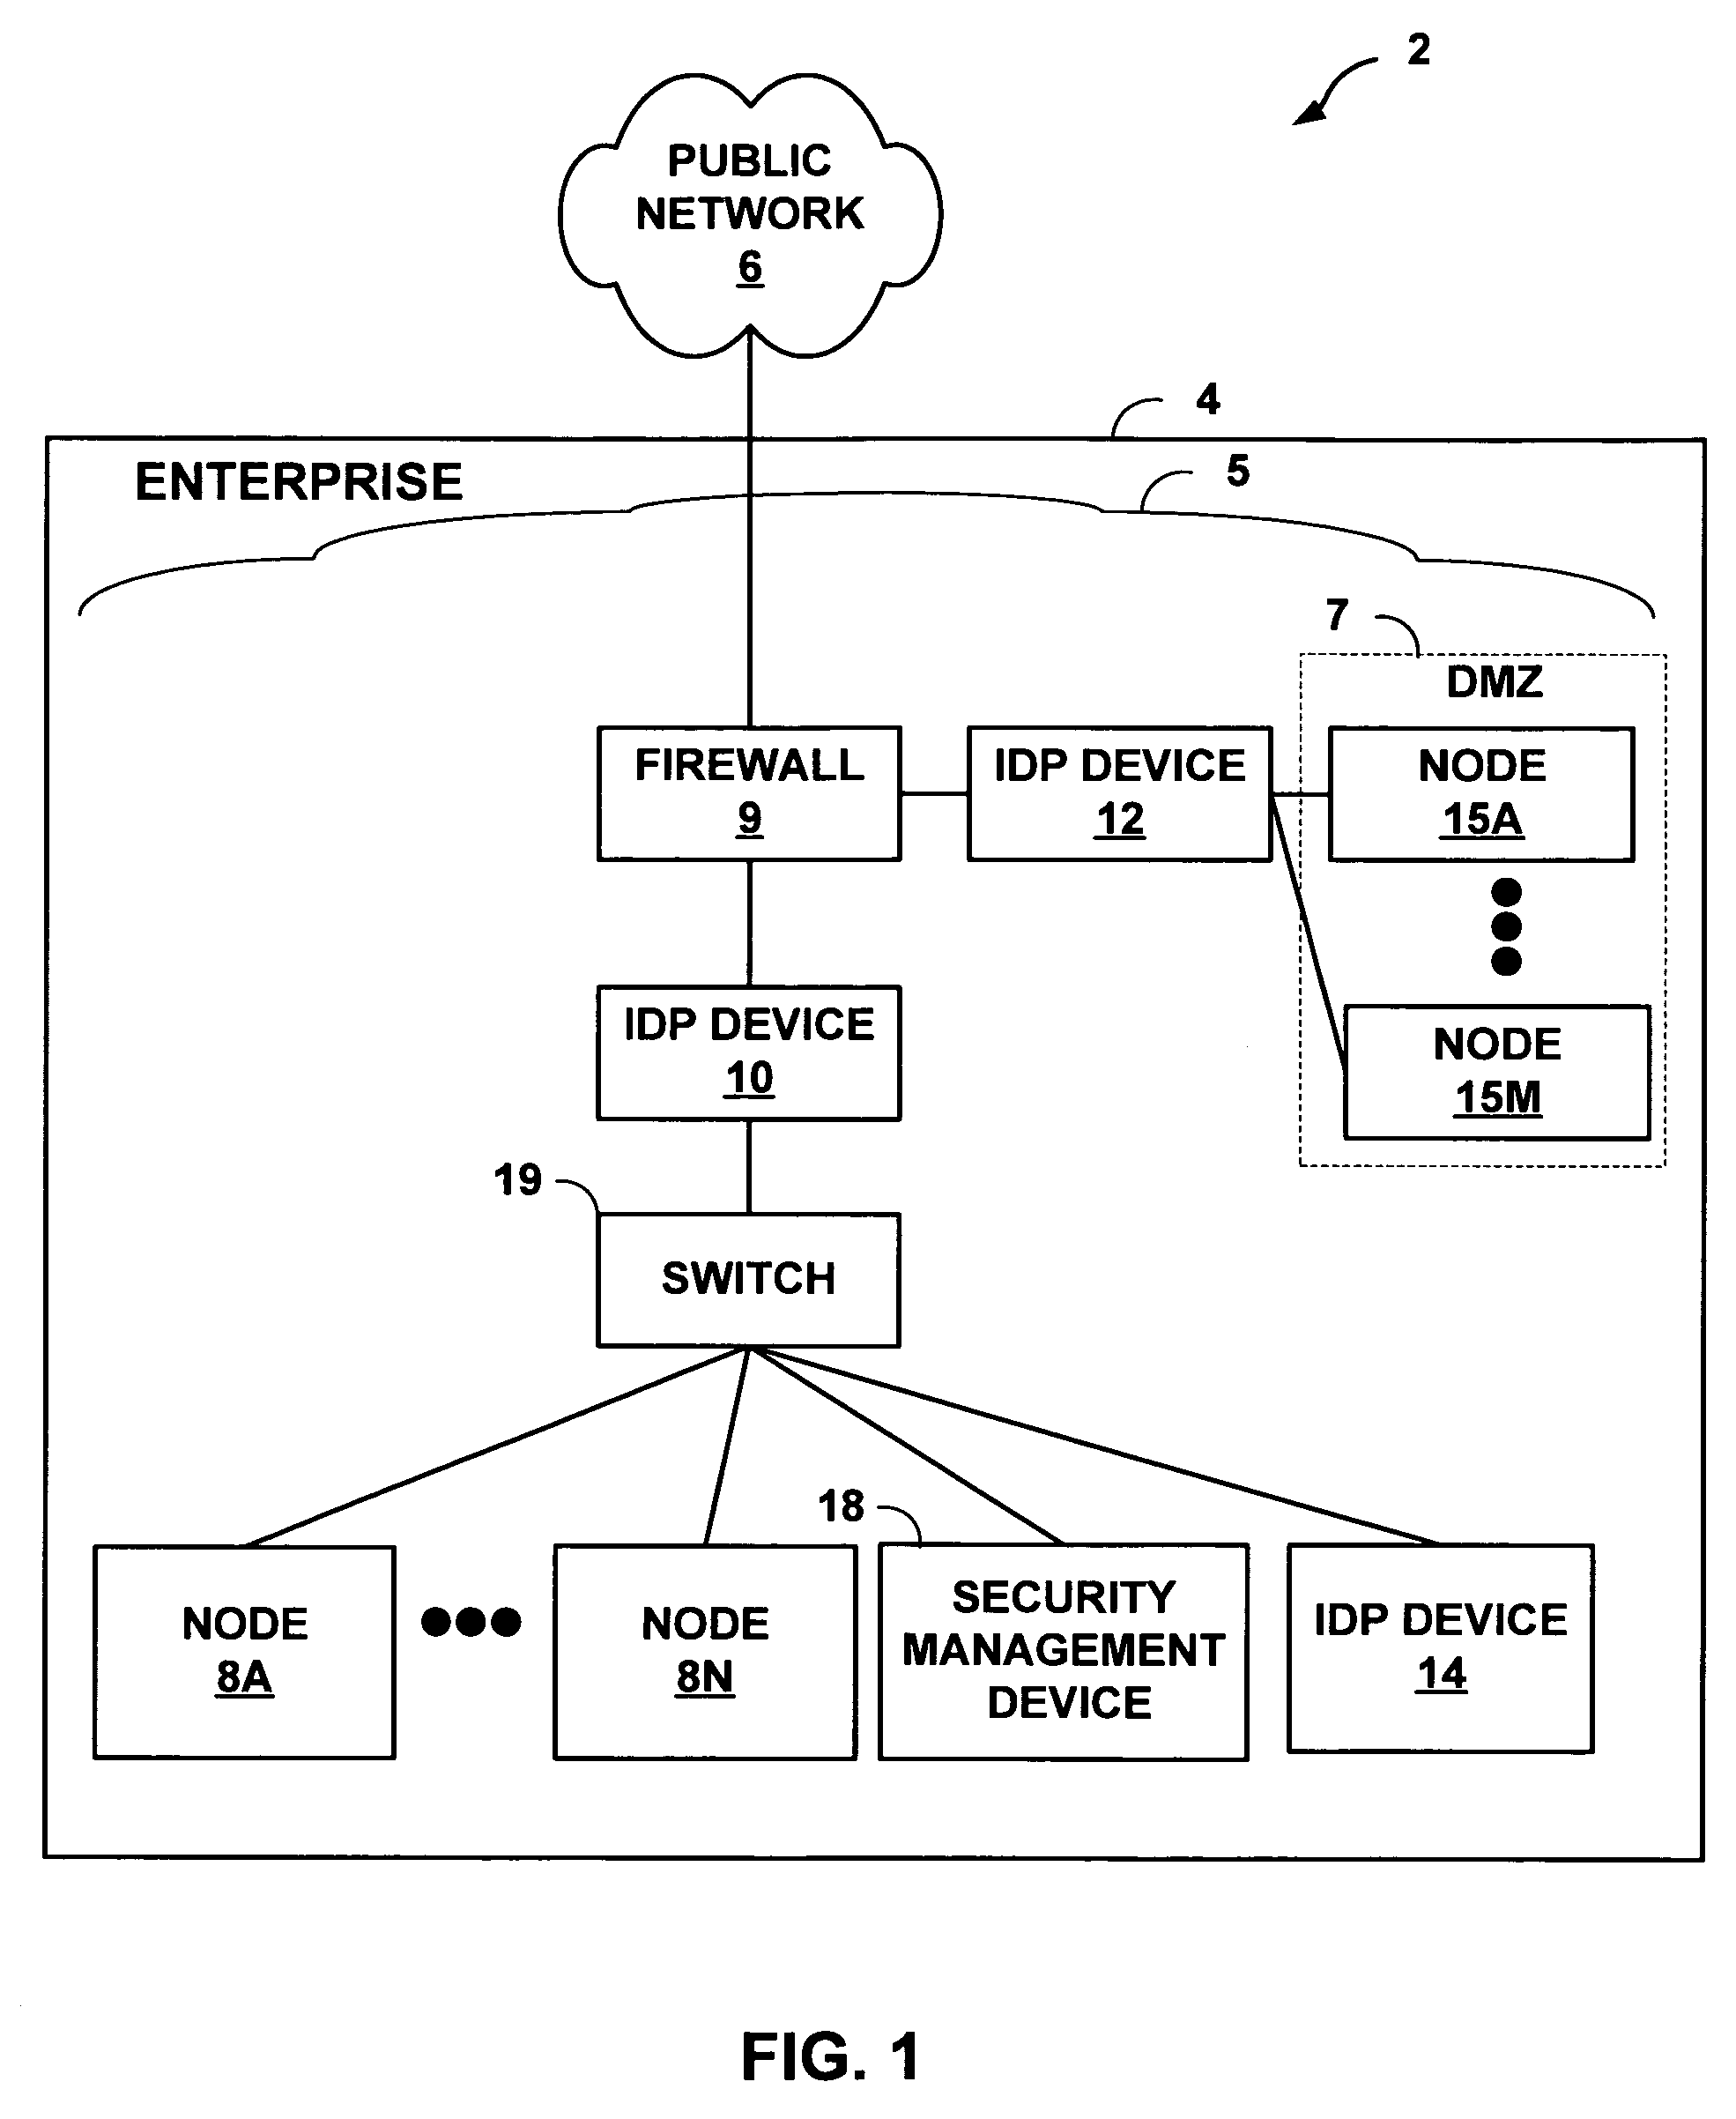 Application-layer monitoring and profiling network traffic